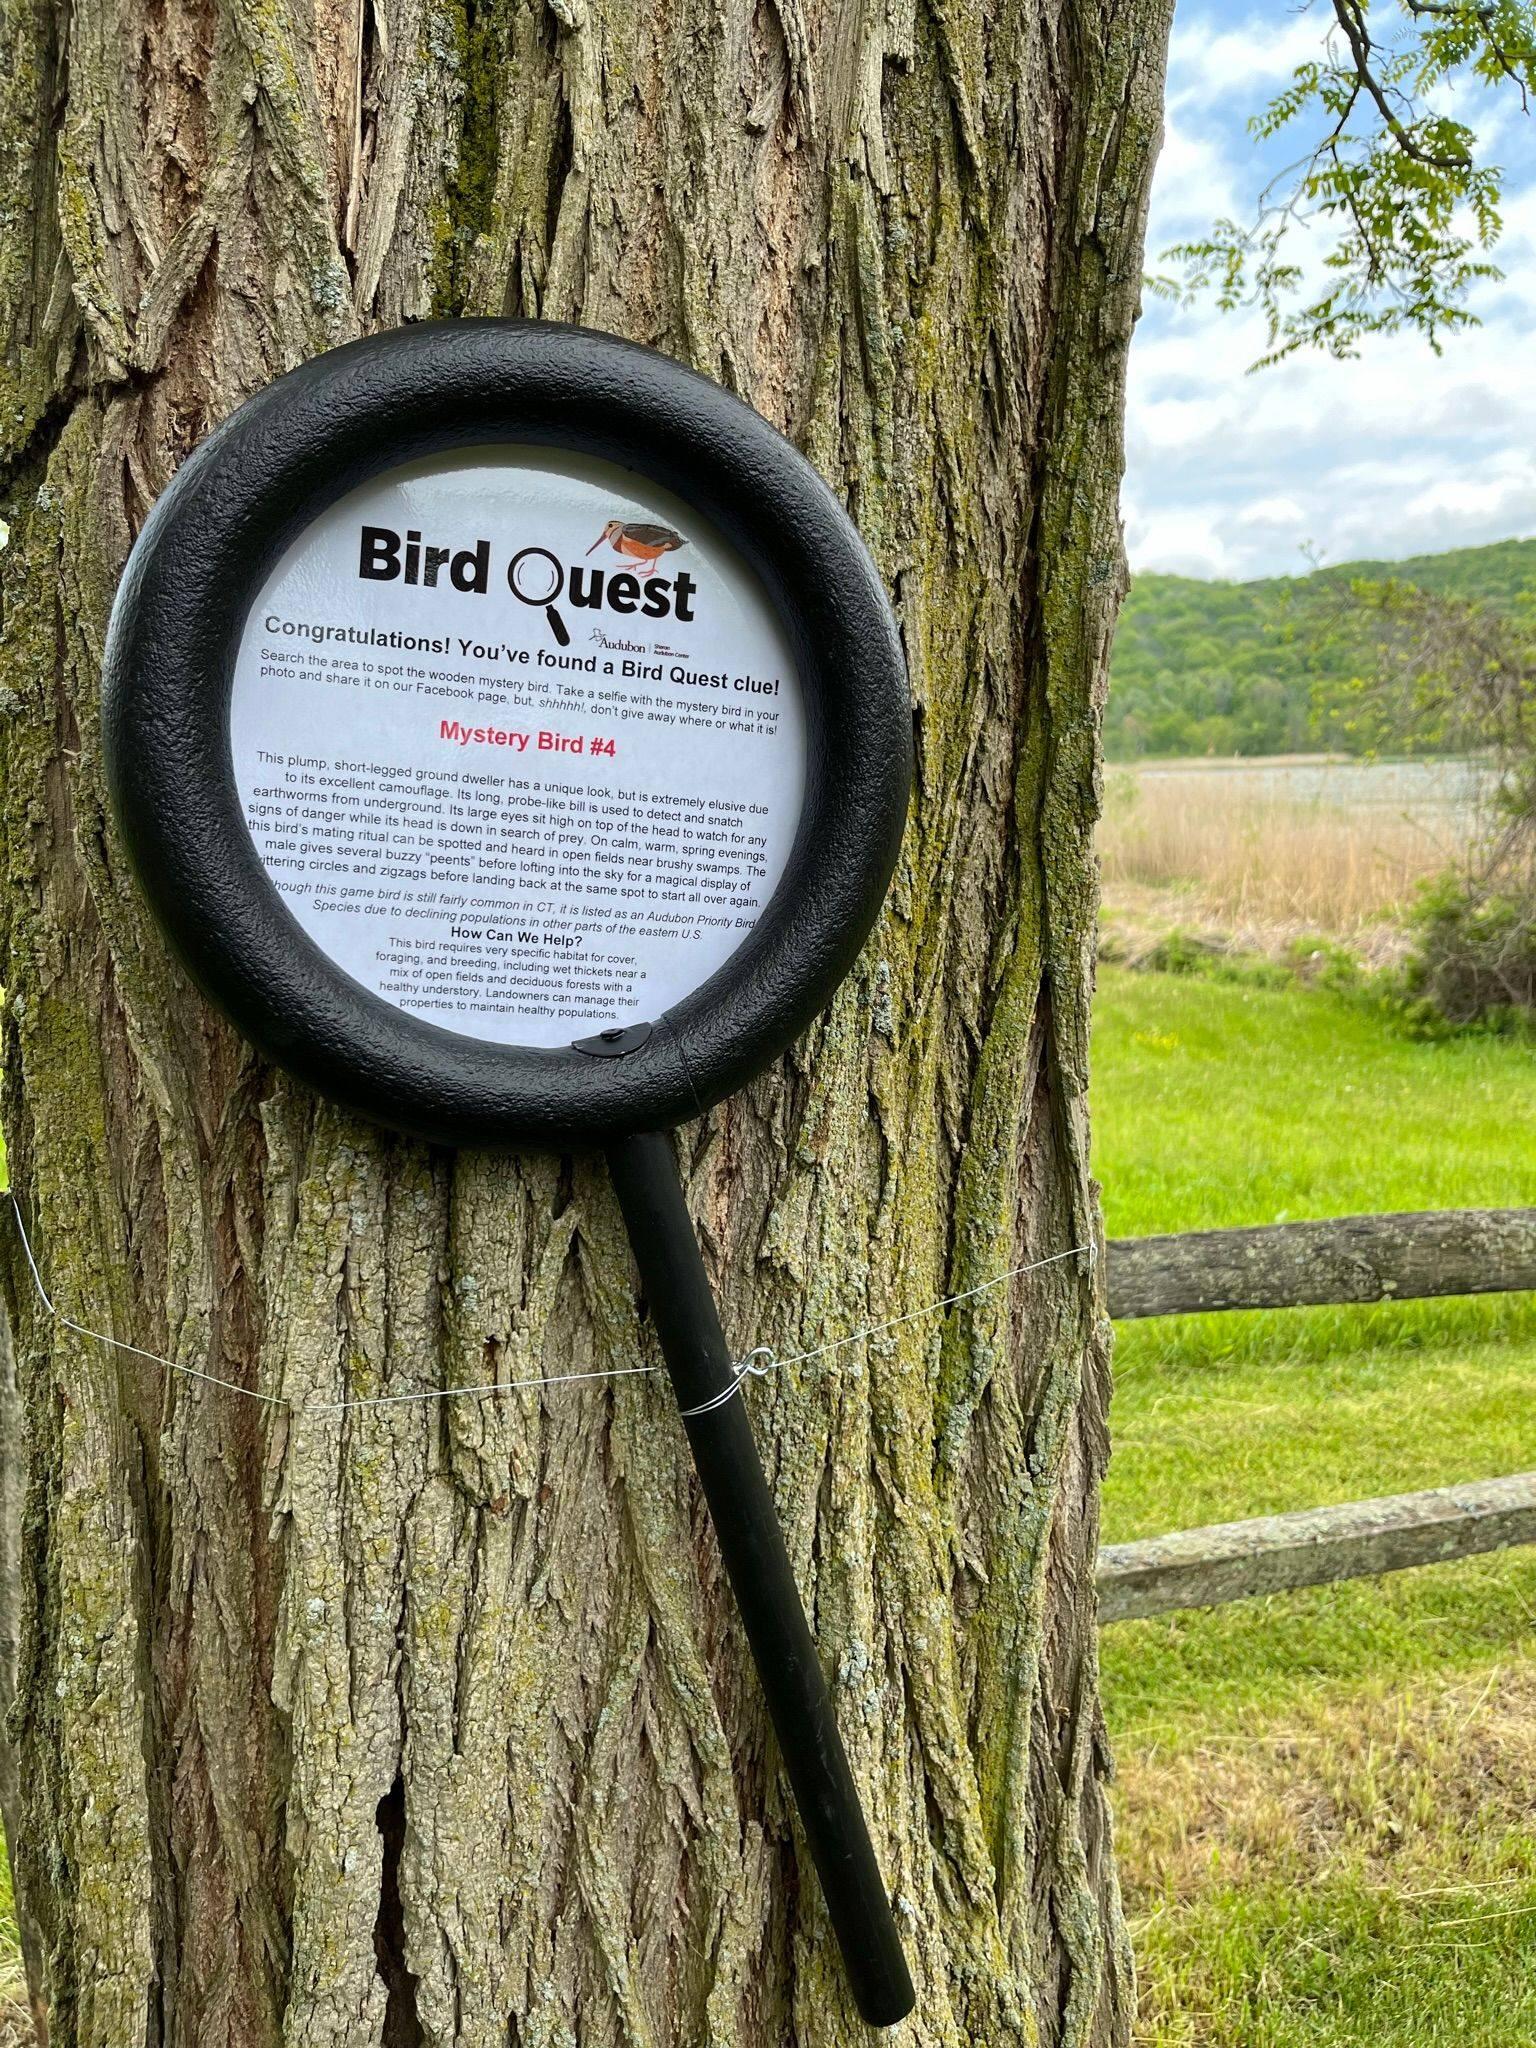 A large plastic "magnifying glass" attached to the side of the tree. Instead of a lens it has a piece of white paper with black text that contains facts about a mystery bird.